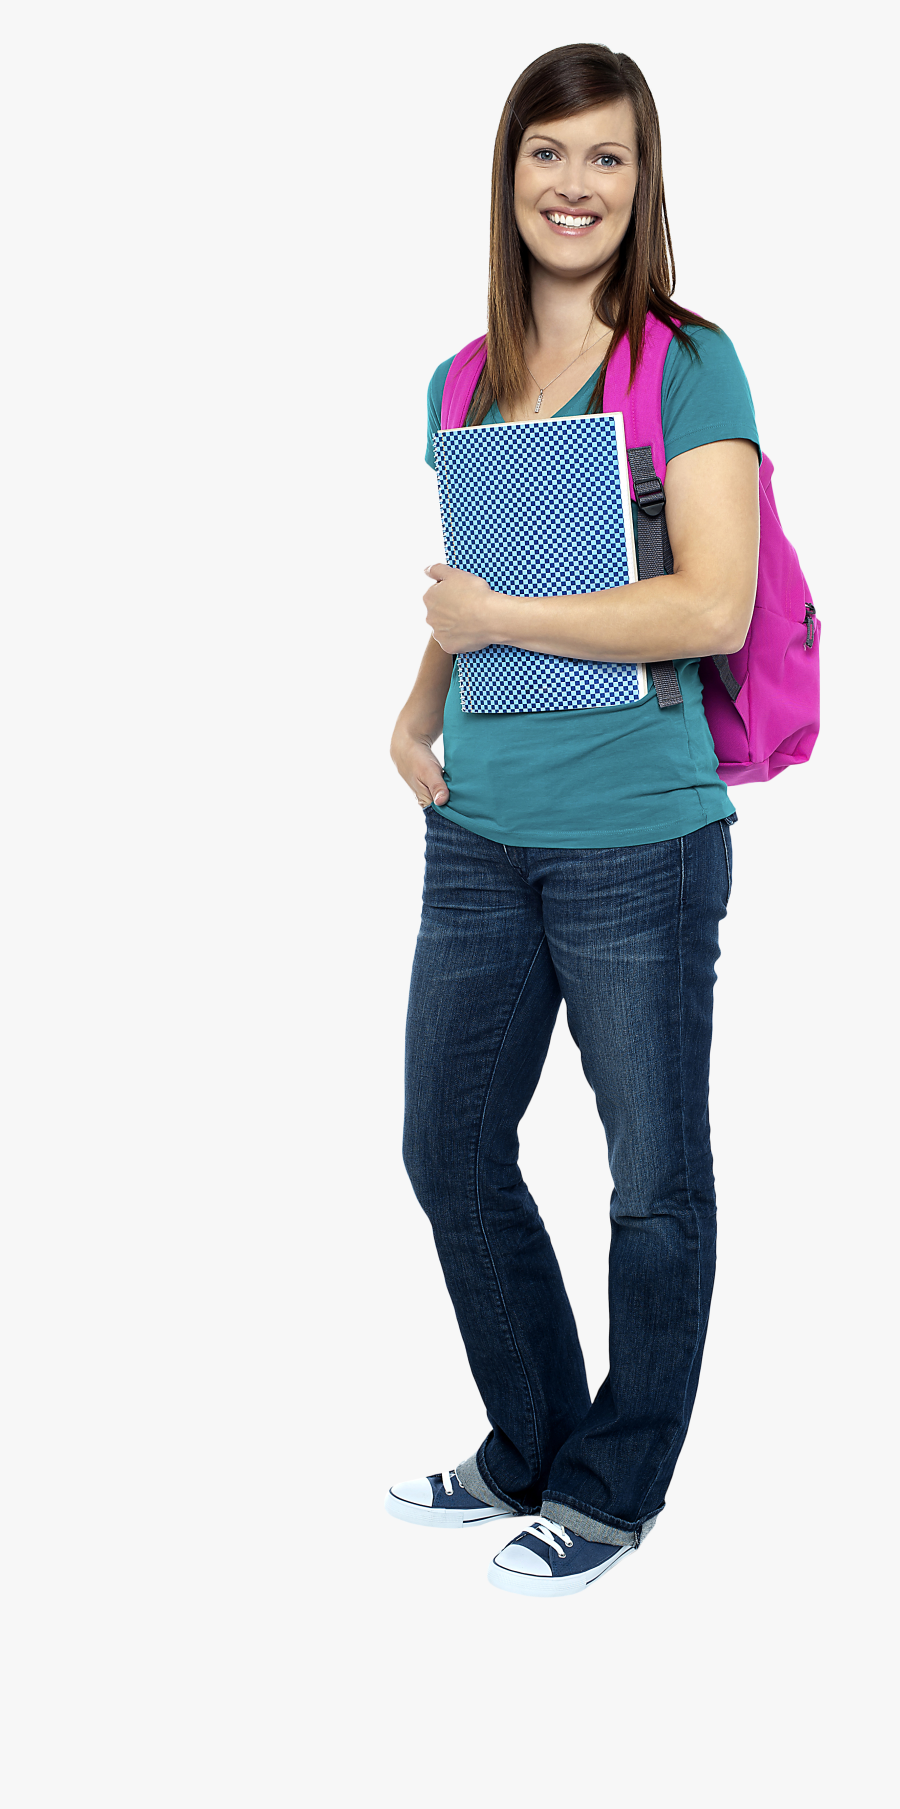 Young Girl Student Png Image - Full Png Student, Transparent Clipart